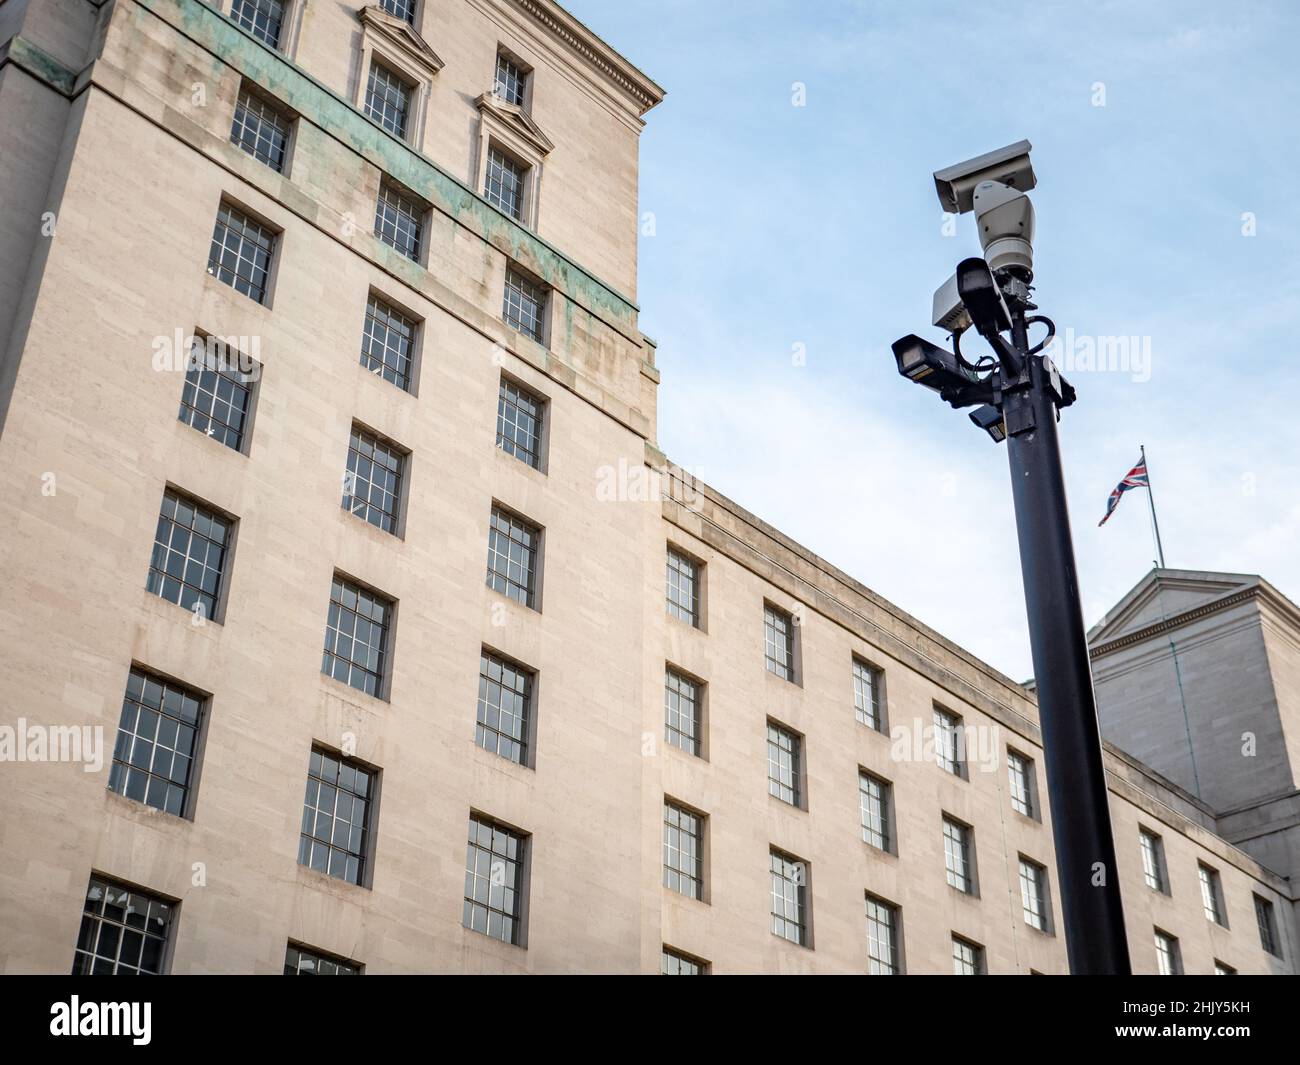 Security CCTV cameras watching over an anonymous Ministry of Defence government building in Whitehall, the heart of UK politics and governance. Stock Photo